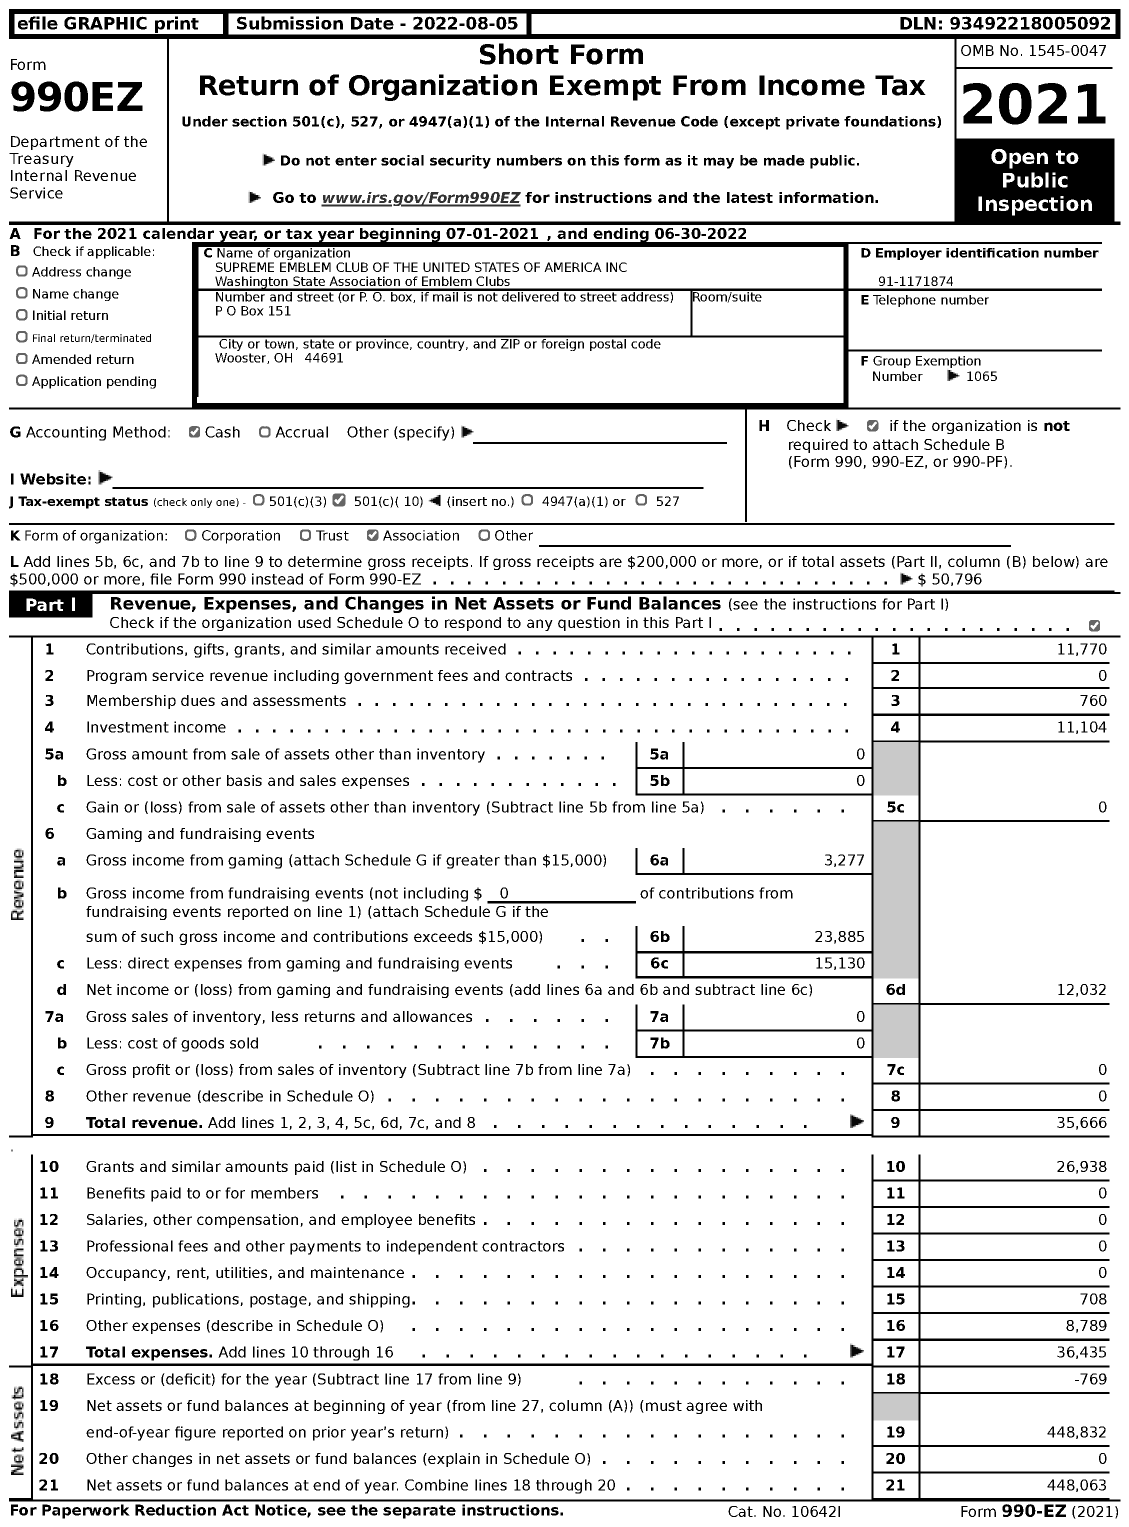 Image of first page of 2021 Form 990EZ for SUPREME EMBLEM CLUB of THE UNITED STATES of AMERICA INC - Washington State